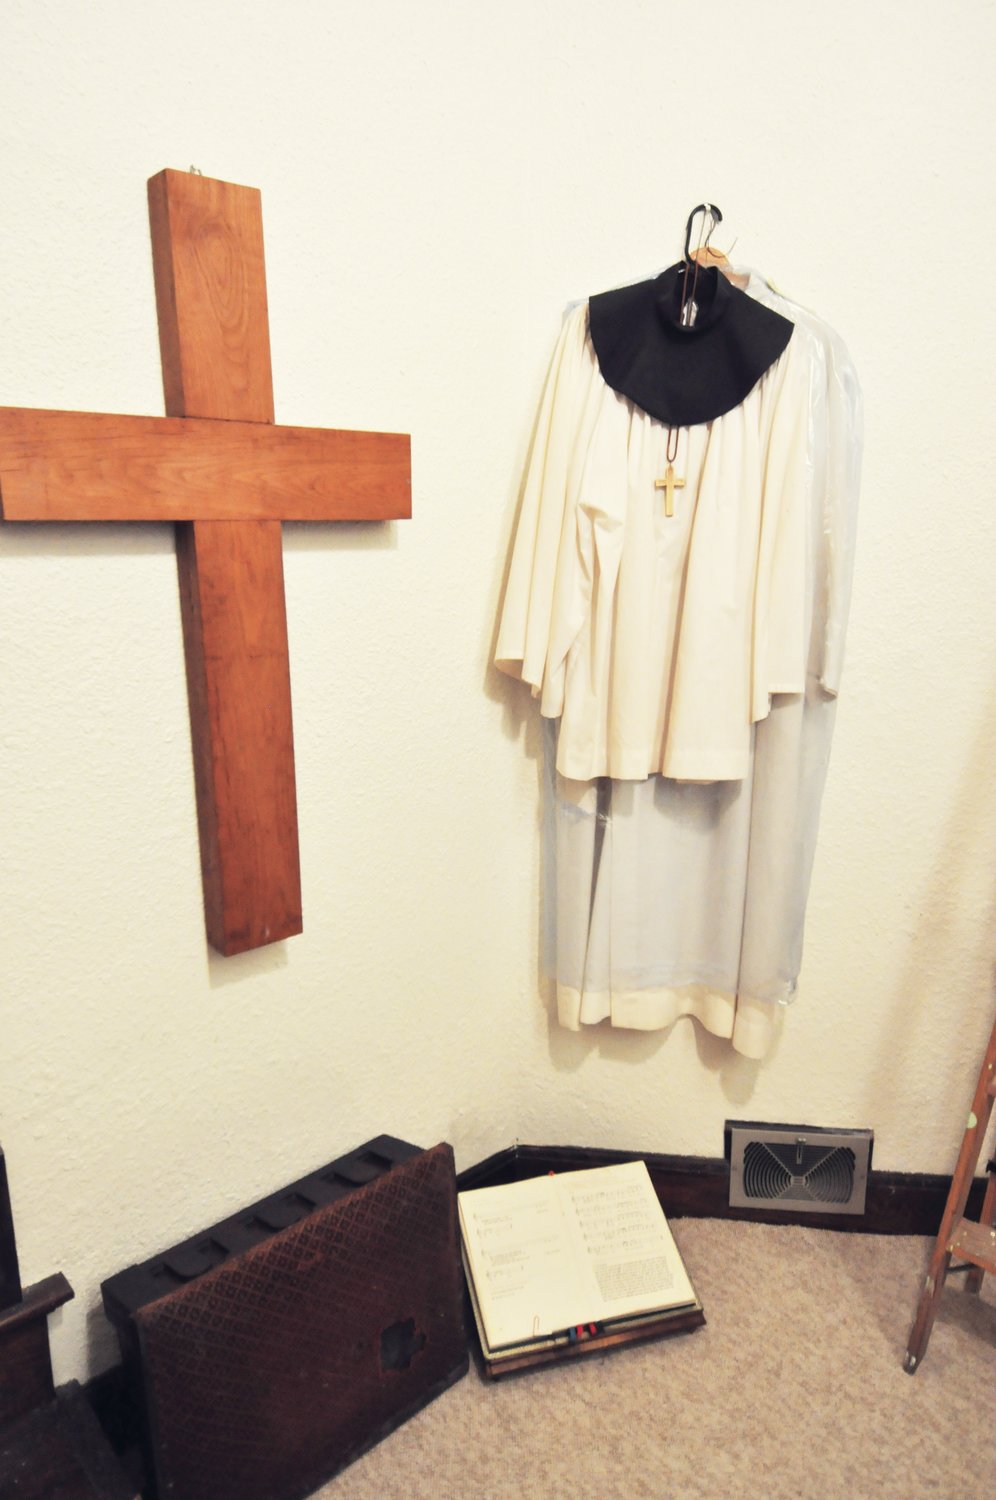 A minister's robe, cross and hymnal are among the historical artifacts being preserved at the Historic Lutheran Church Event Center. The church was built in 1917 and closed in 2018.